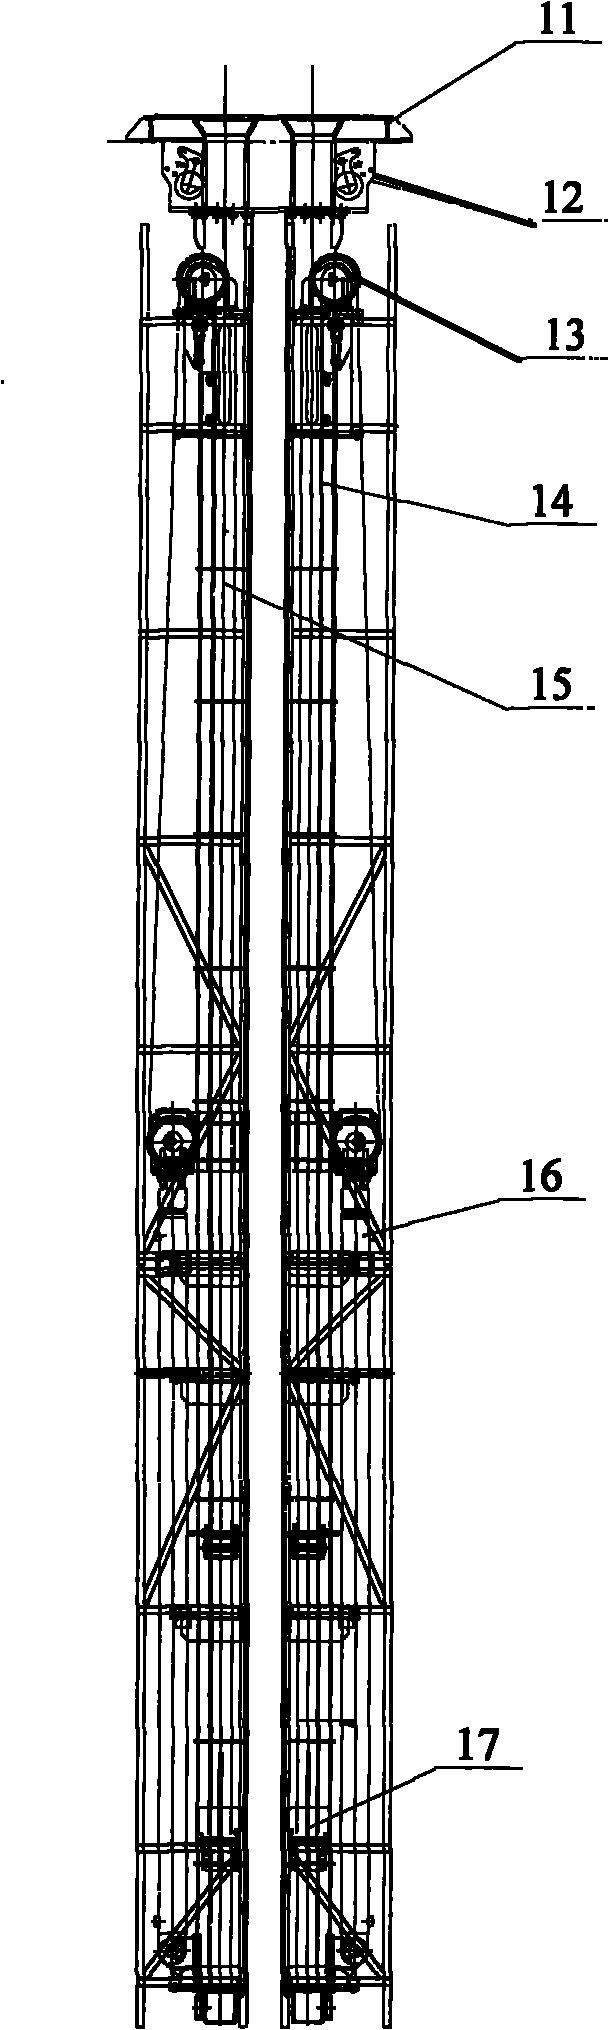 Drilling platform pipe racking system and method